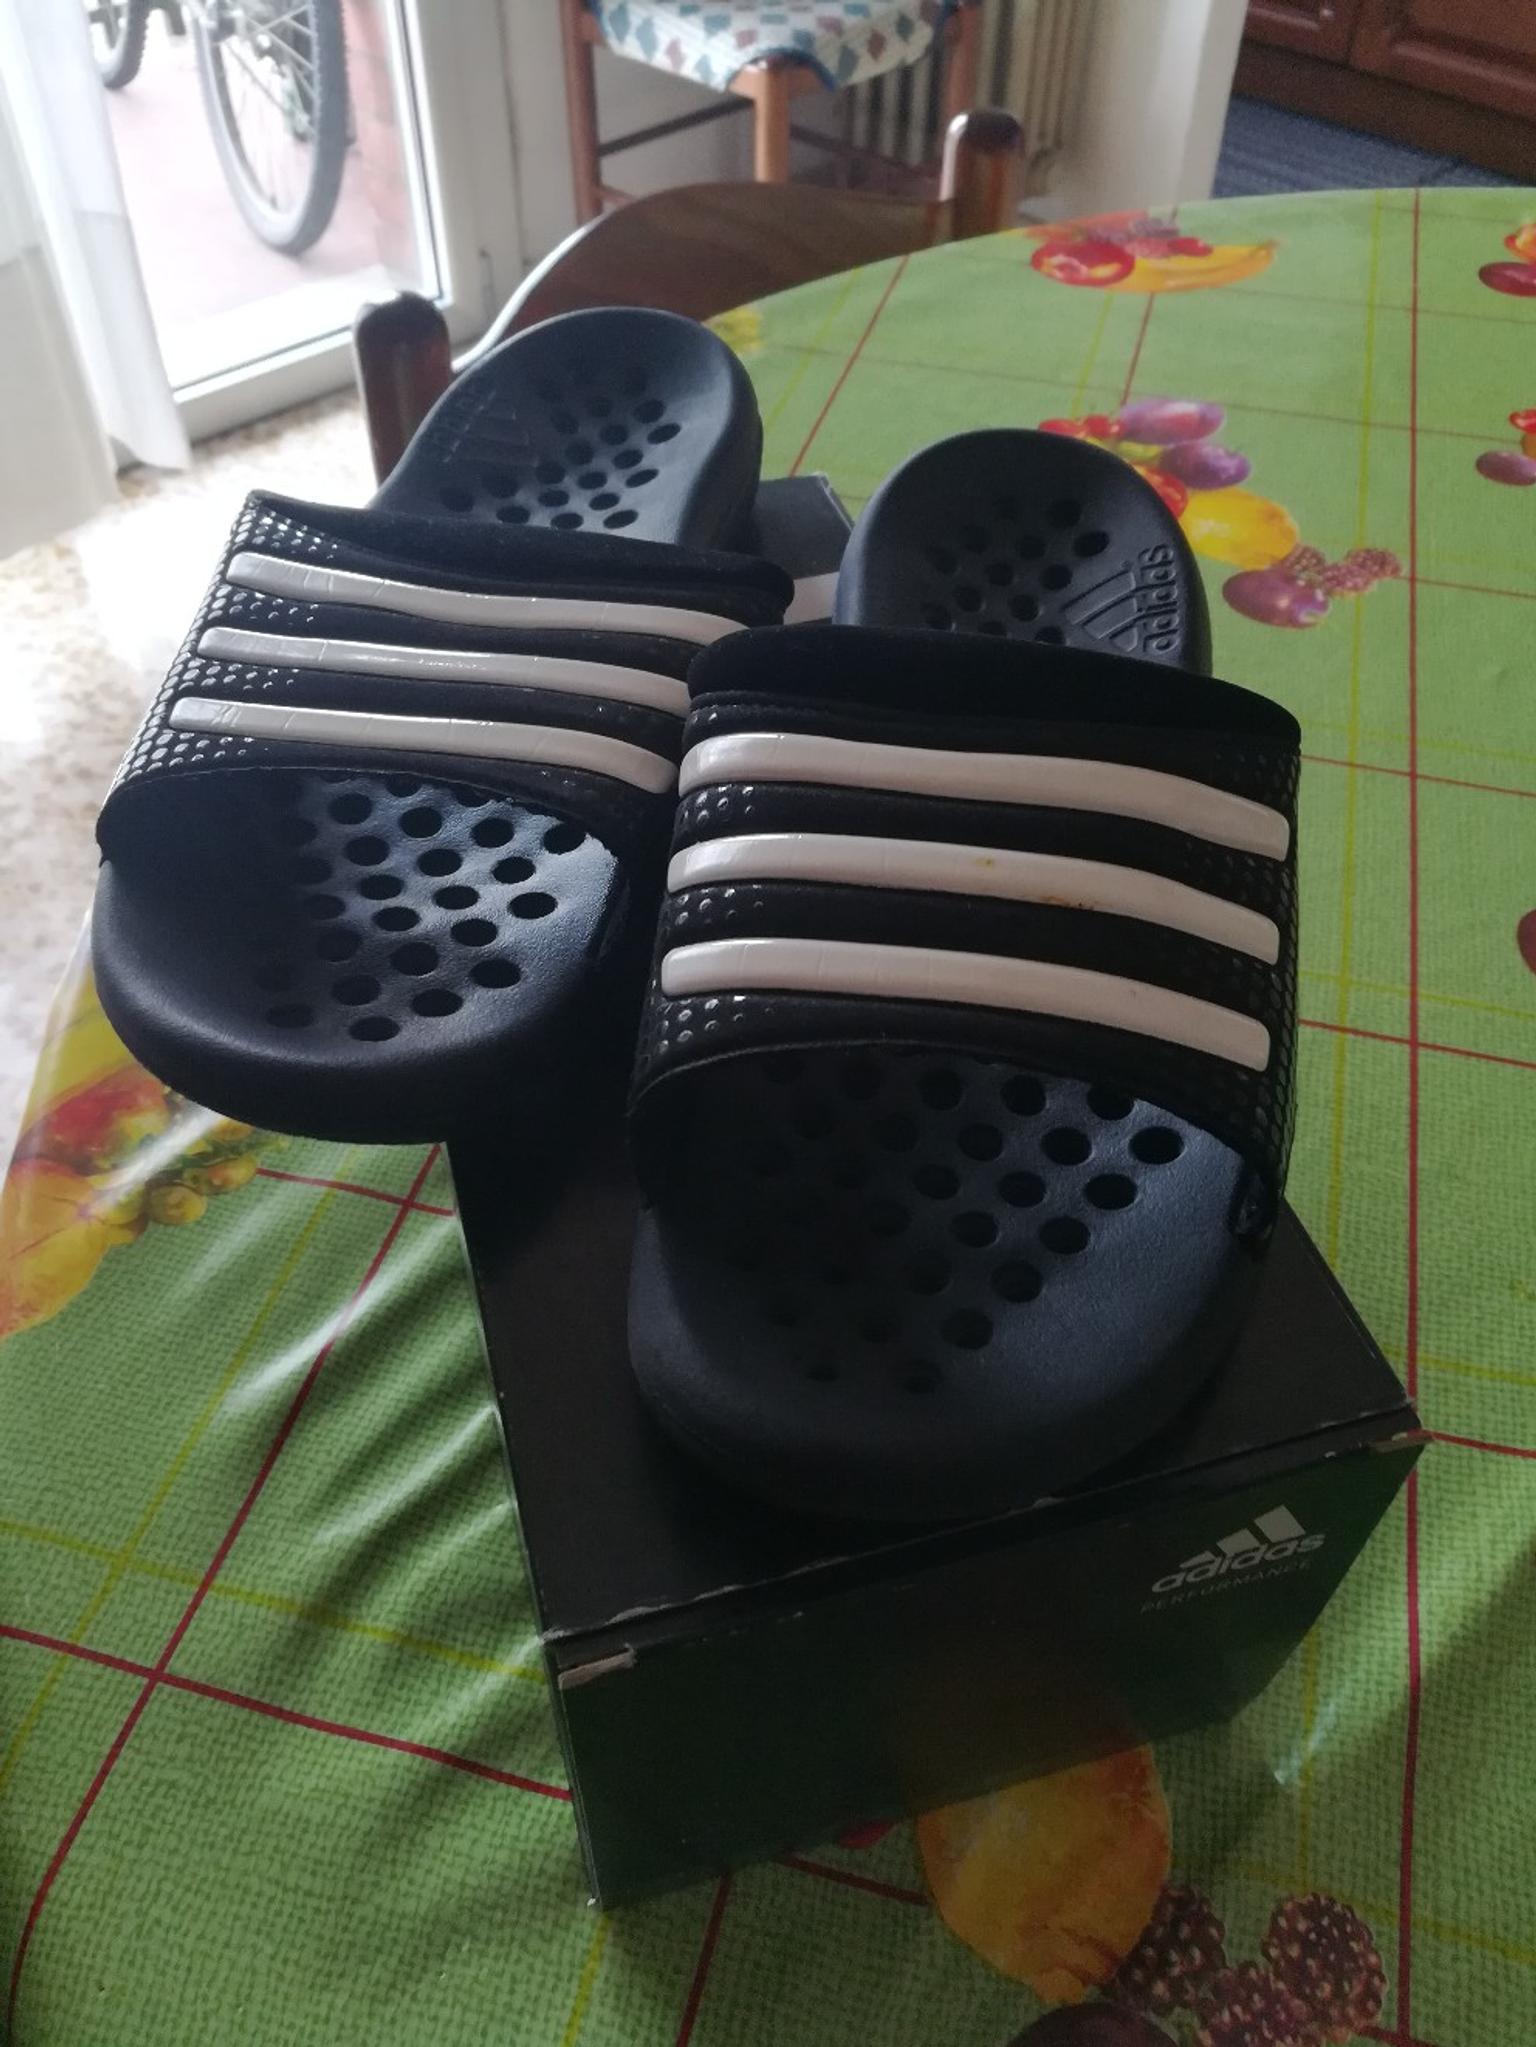 CIABATTE ADIDAS in 12024 Moncalieri for €9.00 for sale | Shpock